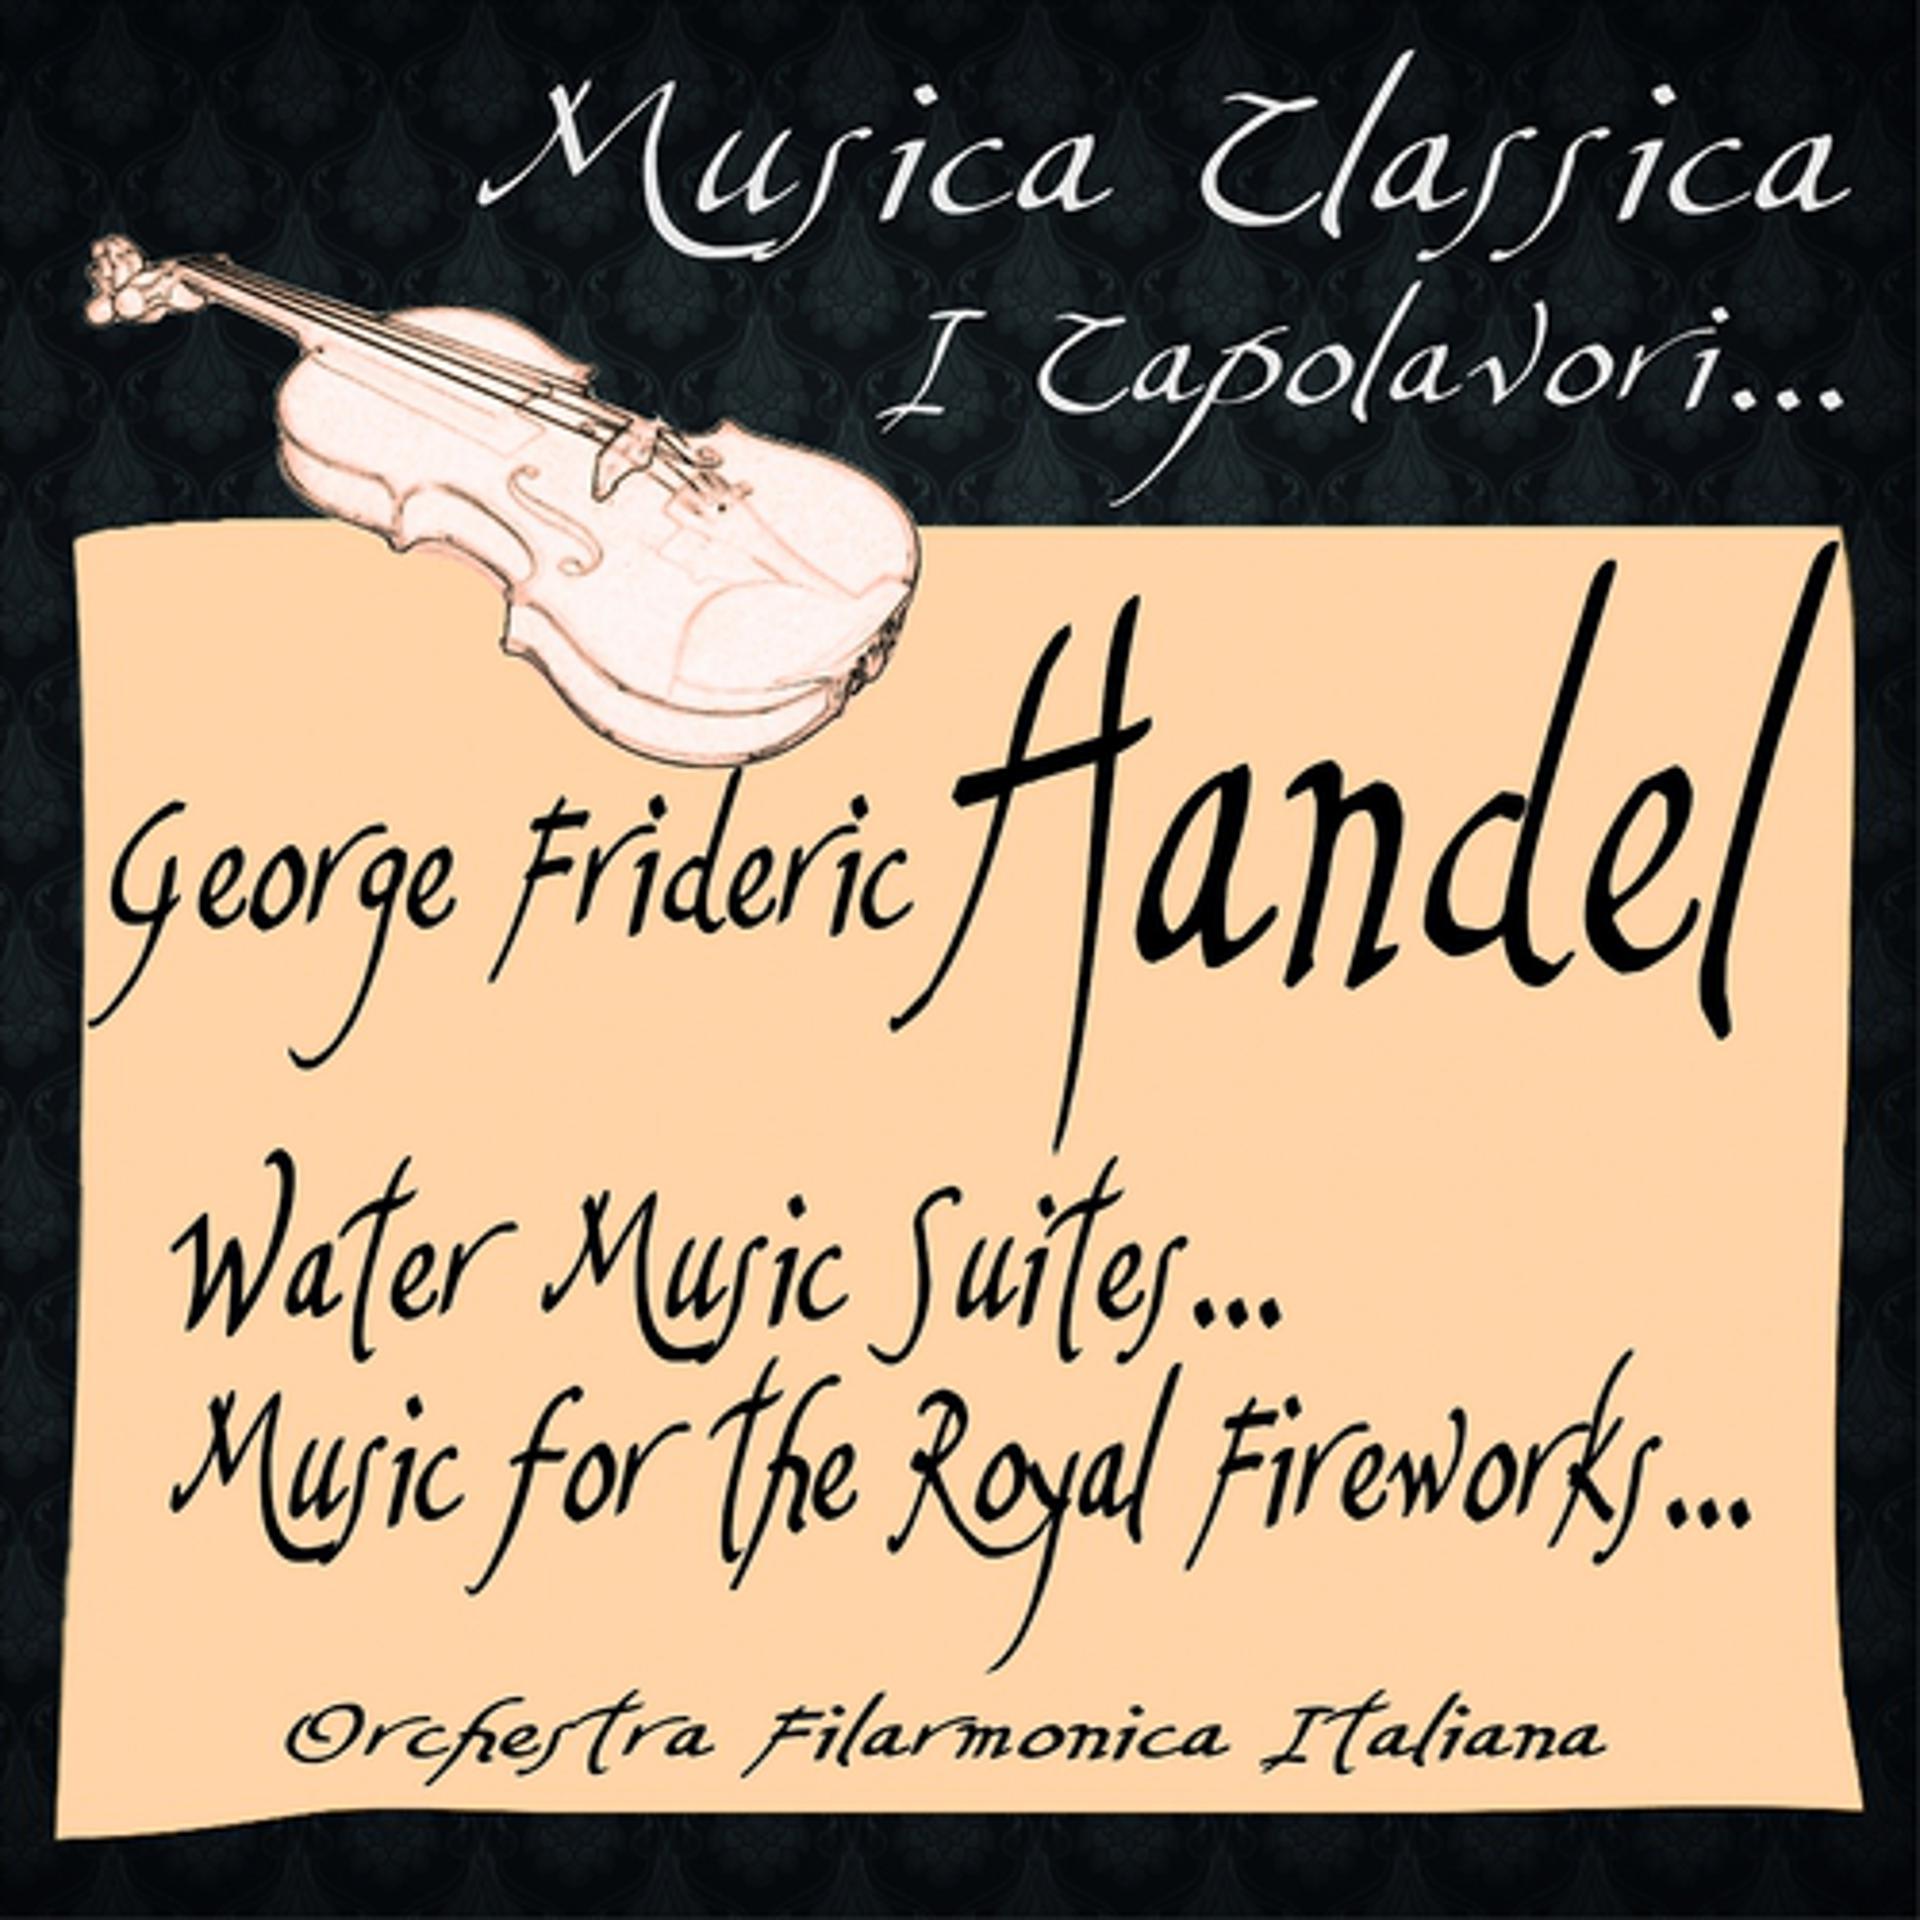 Постер альбома Handel: Water Music Suites... Music for the Royal Fireworks...